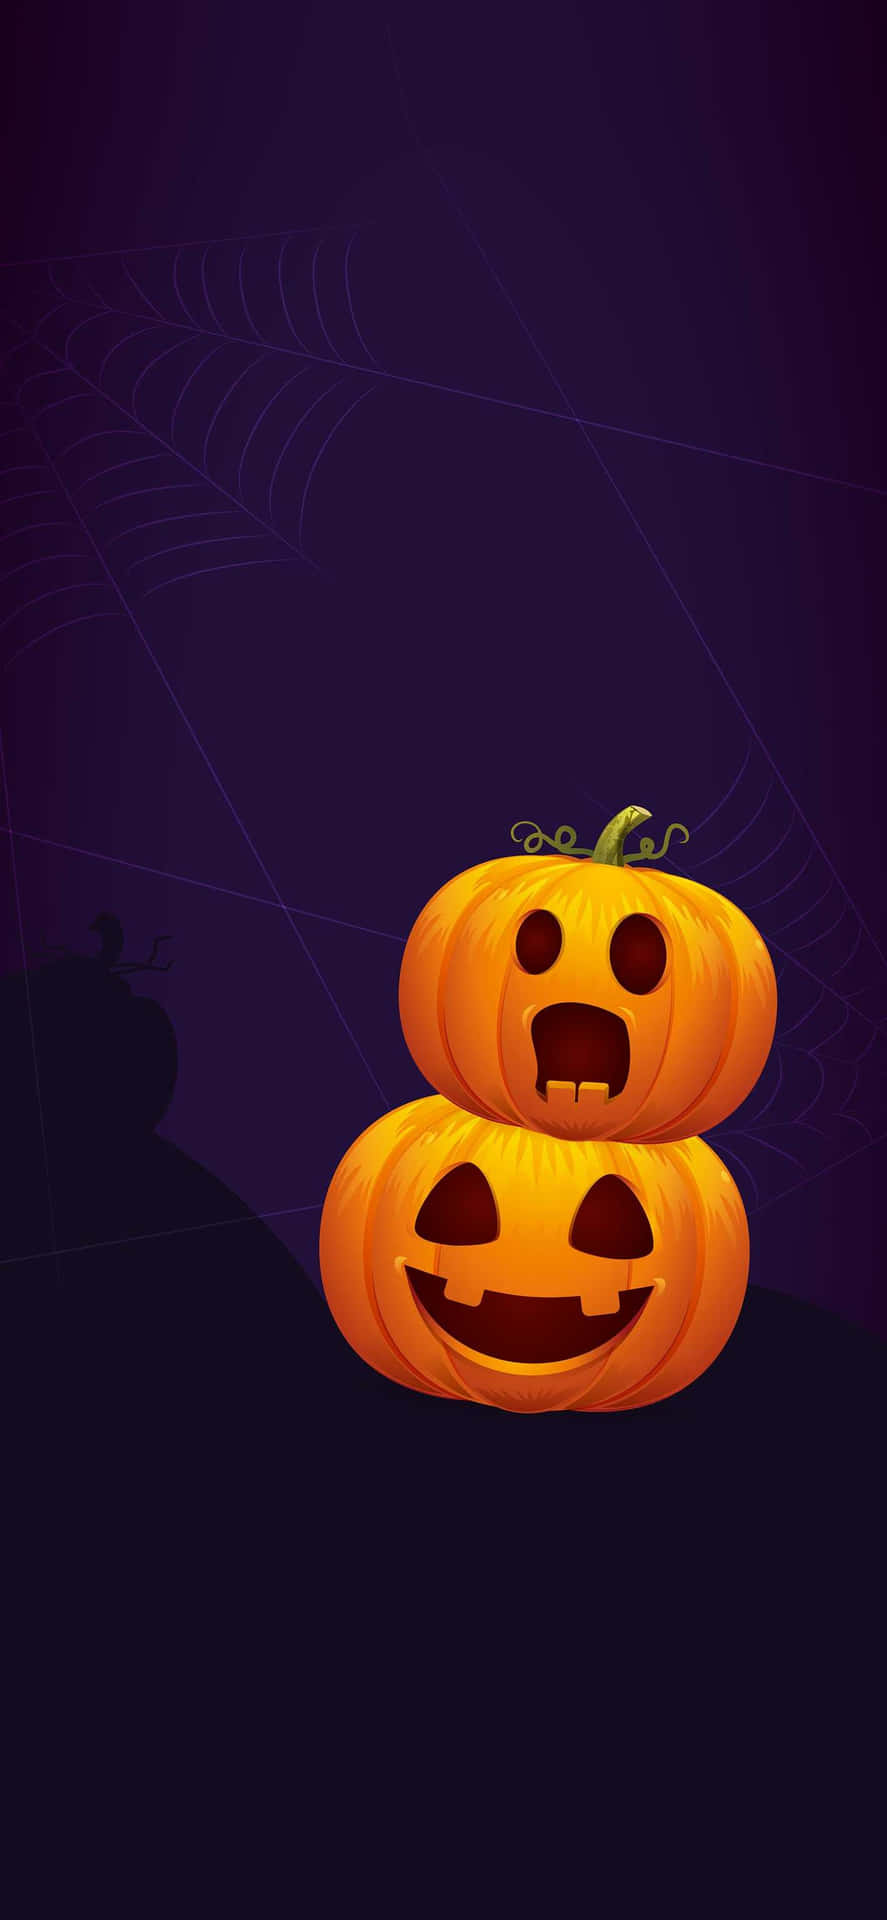 Trick or Treat? Have a fun and safe spooky Halloween. Wallpaper